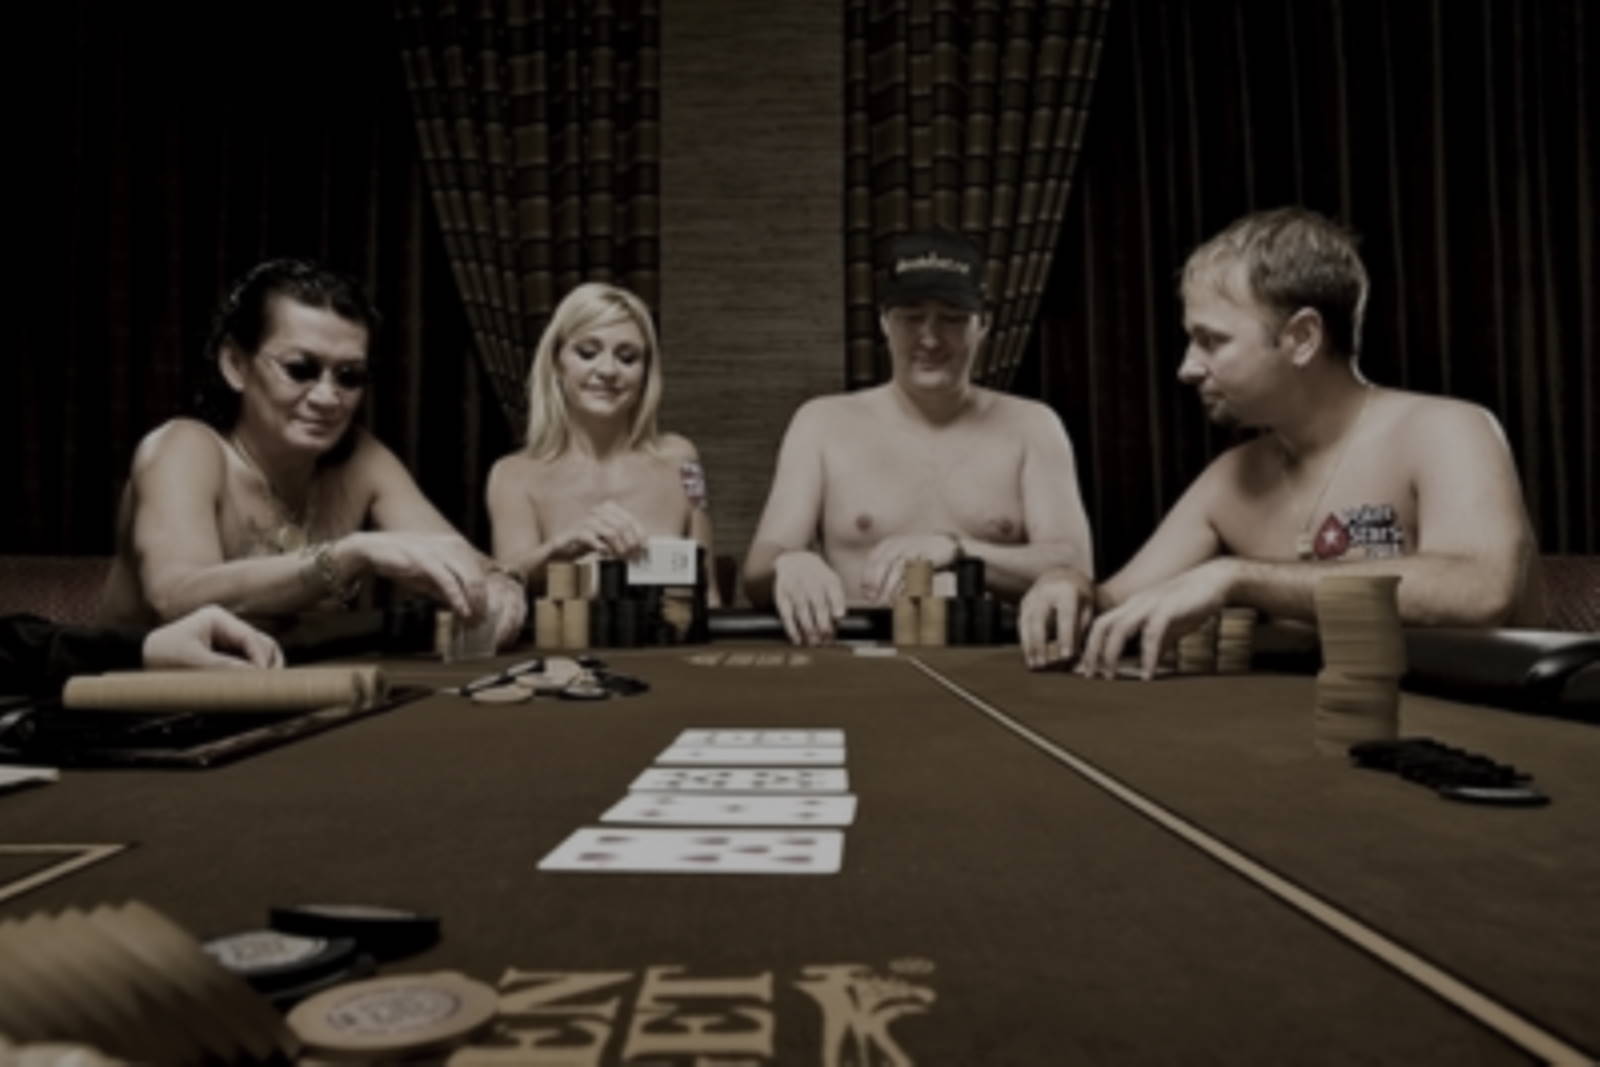 How to Play Strip Poker - A Guide to Strip Poker Rules.